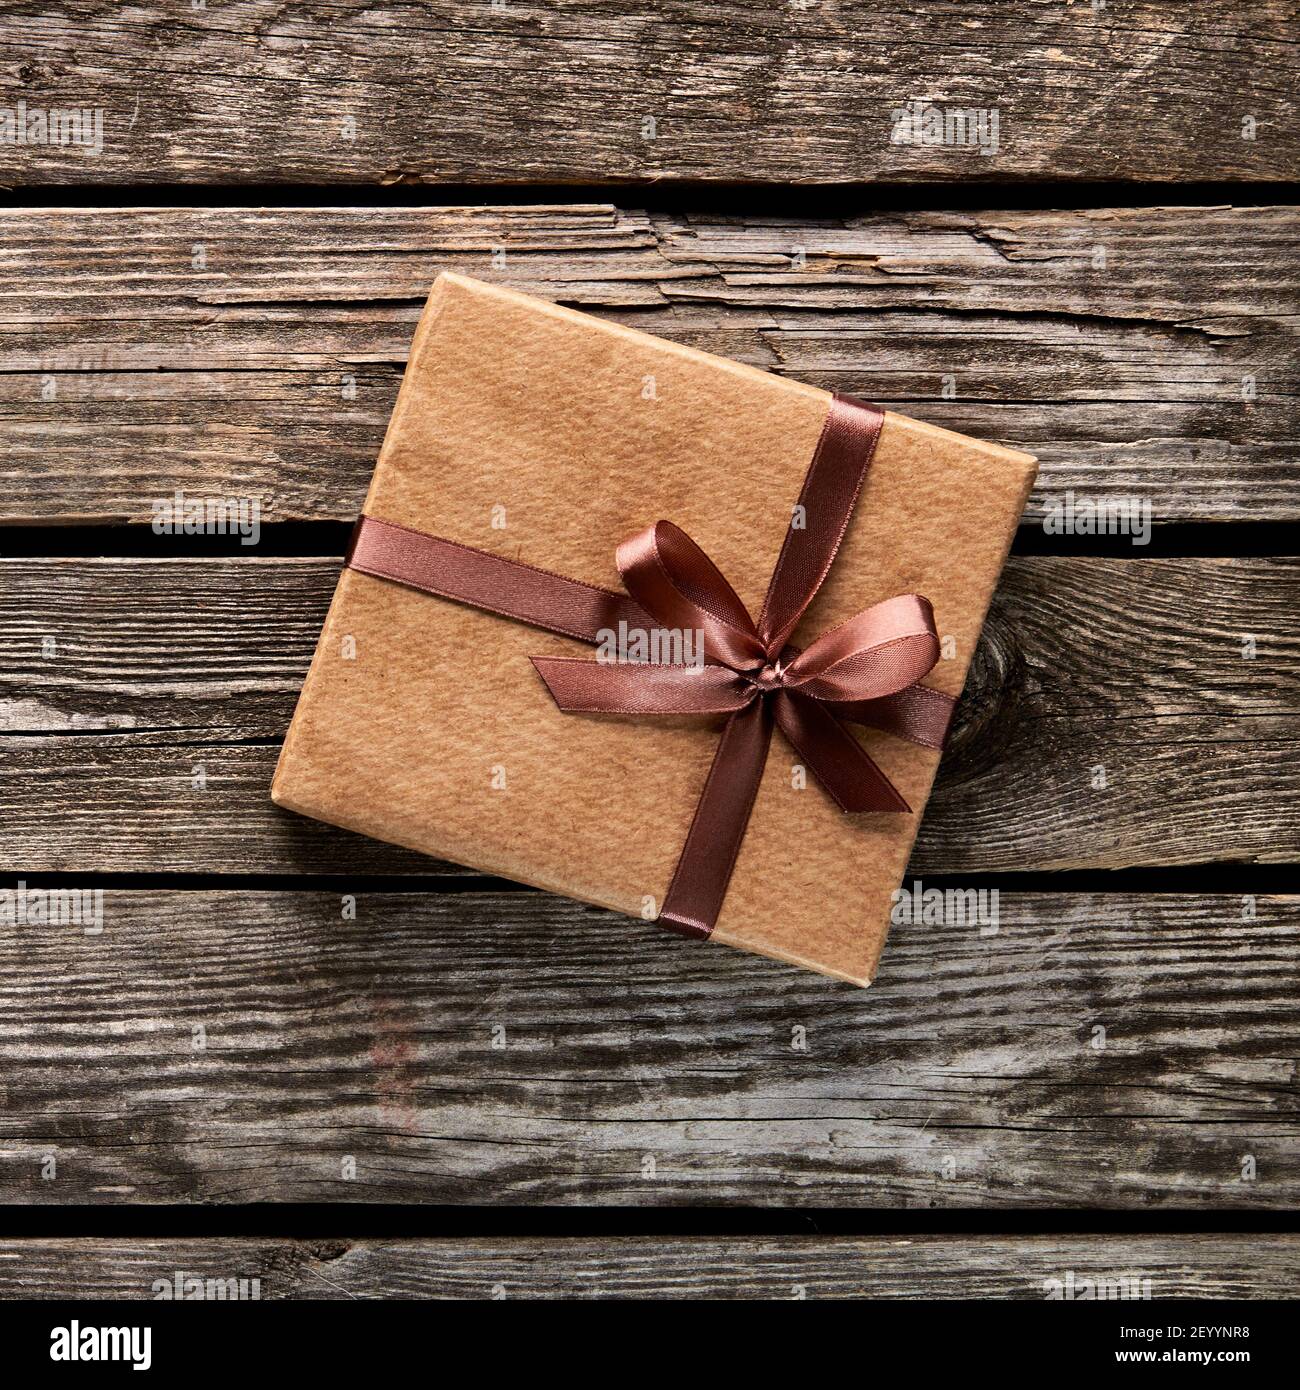 Vintage gift box on wooden background Stock Photo